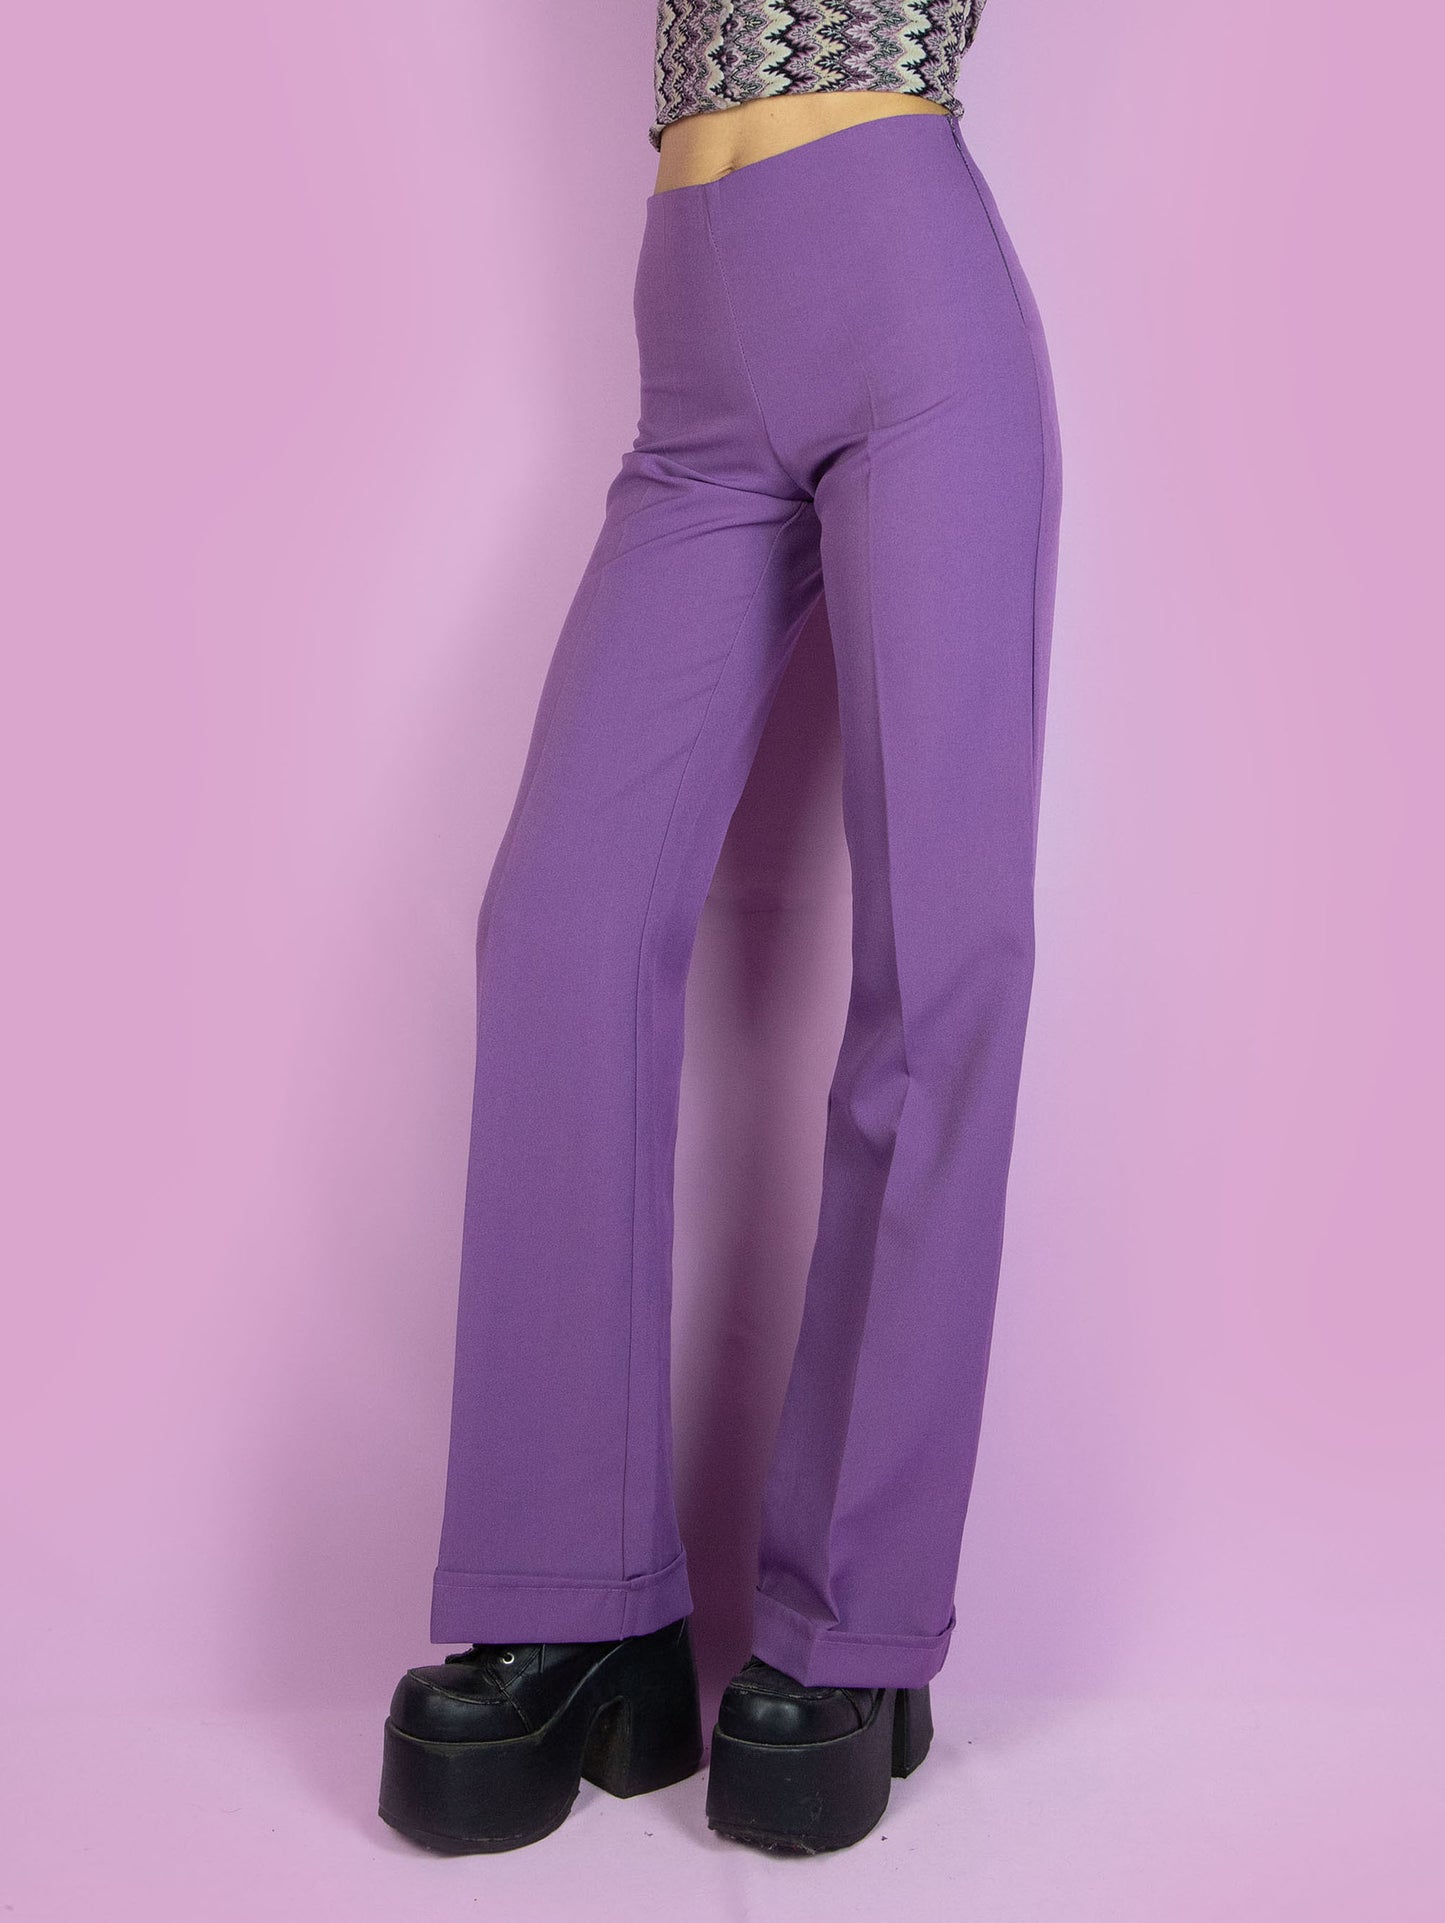 The Vintage 90s Purple Wide Trousers are high-waisted wide purple pants with a side zipper closure. Elegant tailored style 1990s classic pleated trousers.